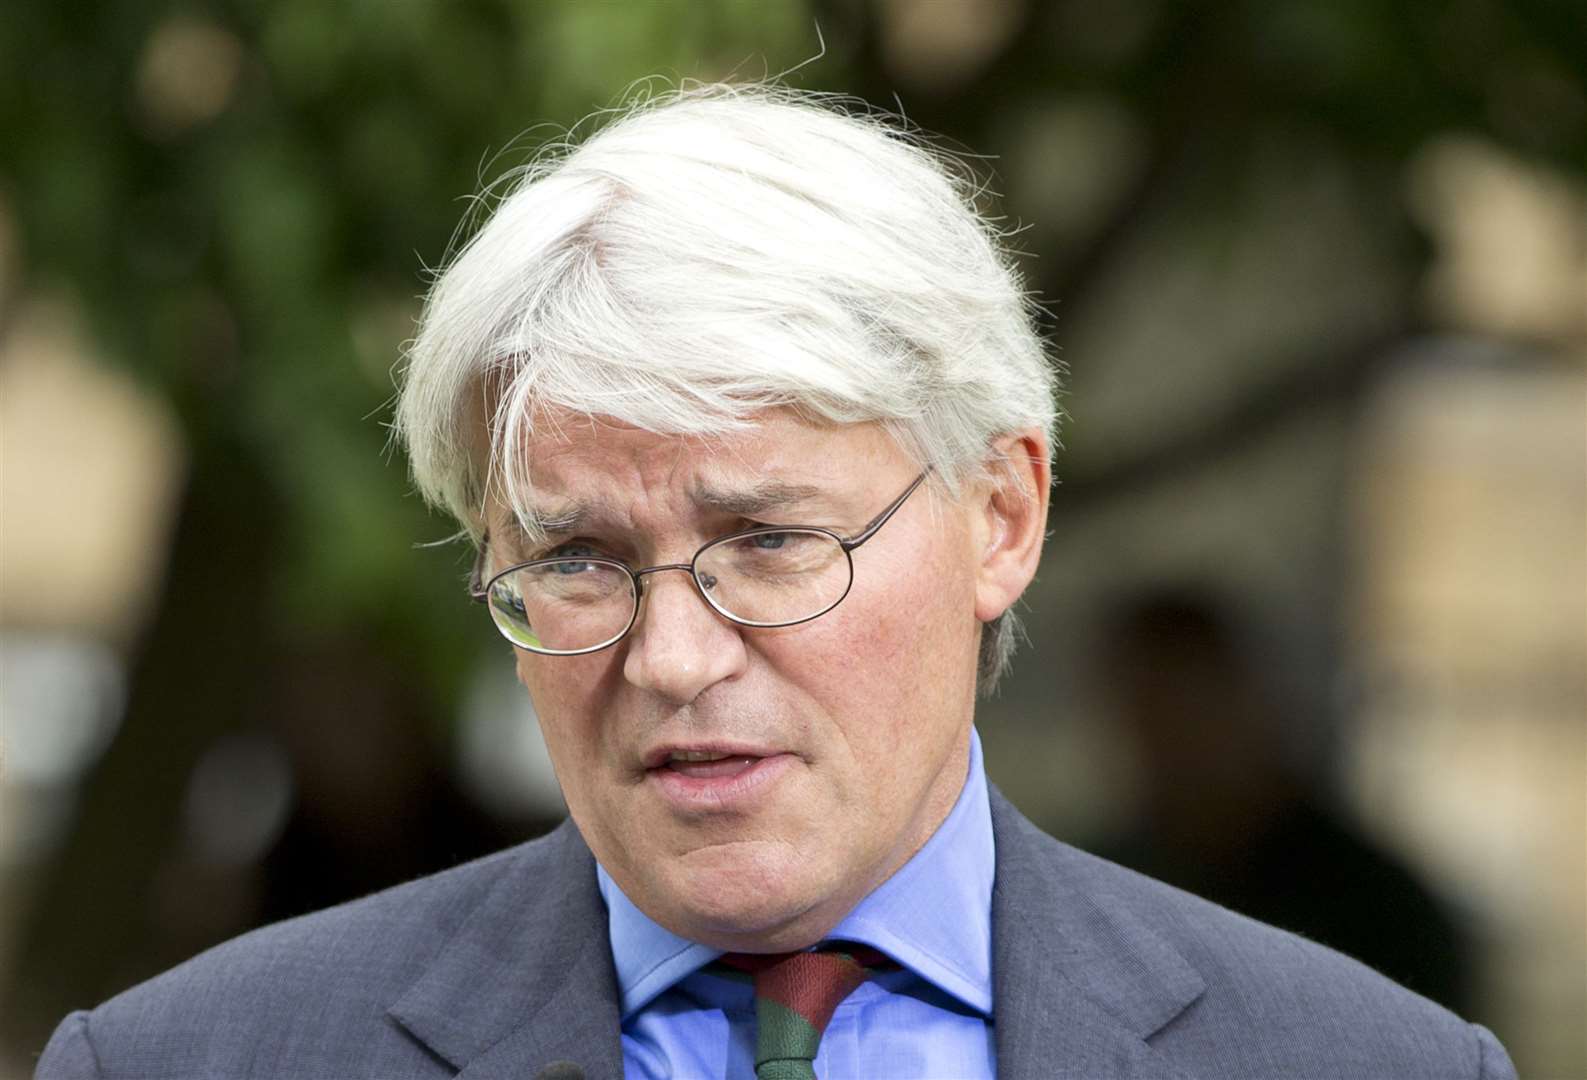 Andrew Mitchell claimed the change will lead to tens of thousands of preventable deaths (Isabel Infantes/PA)